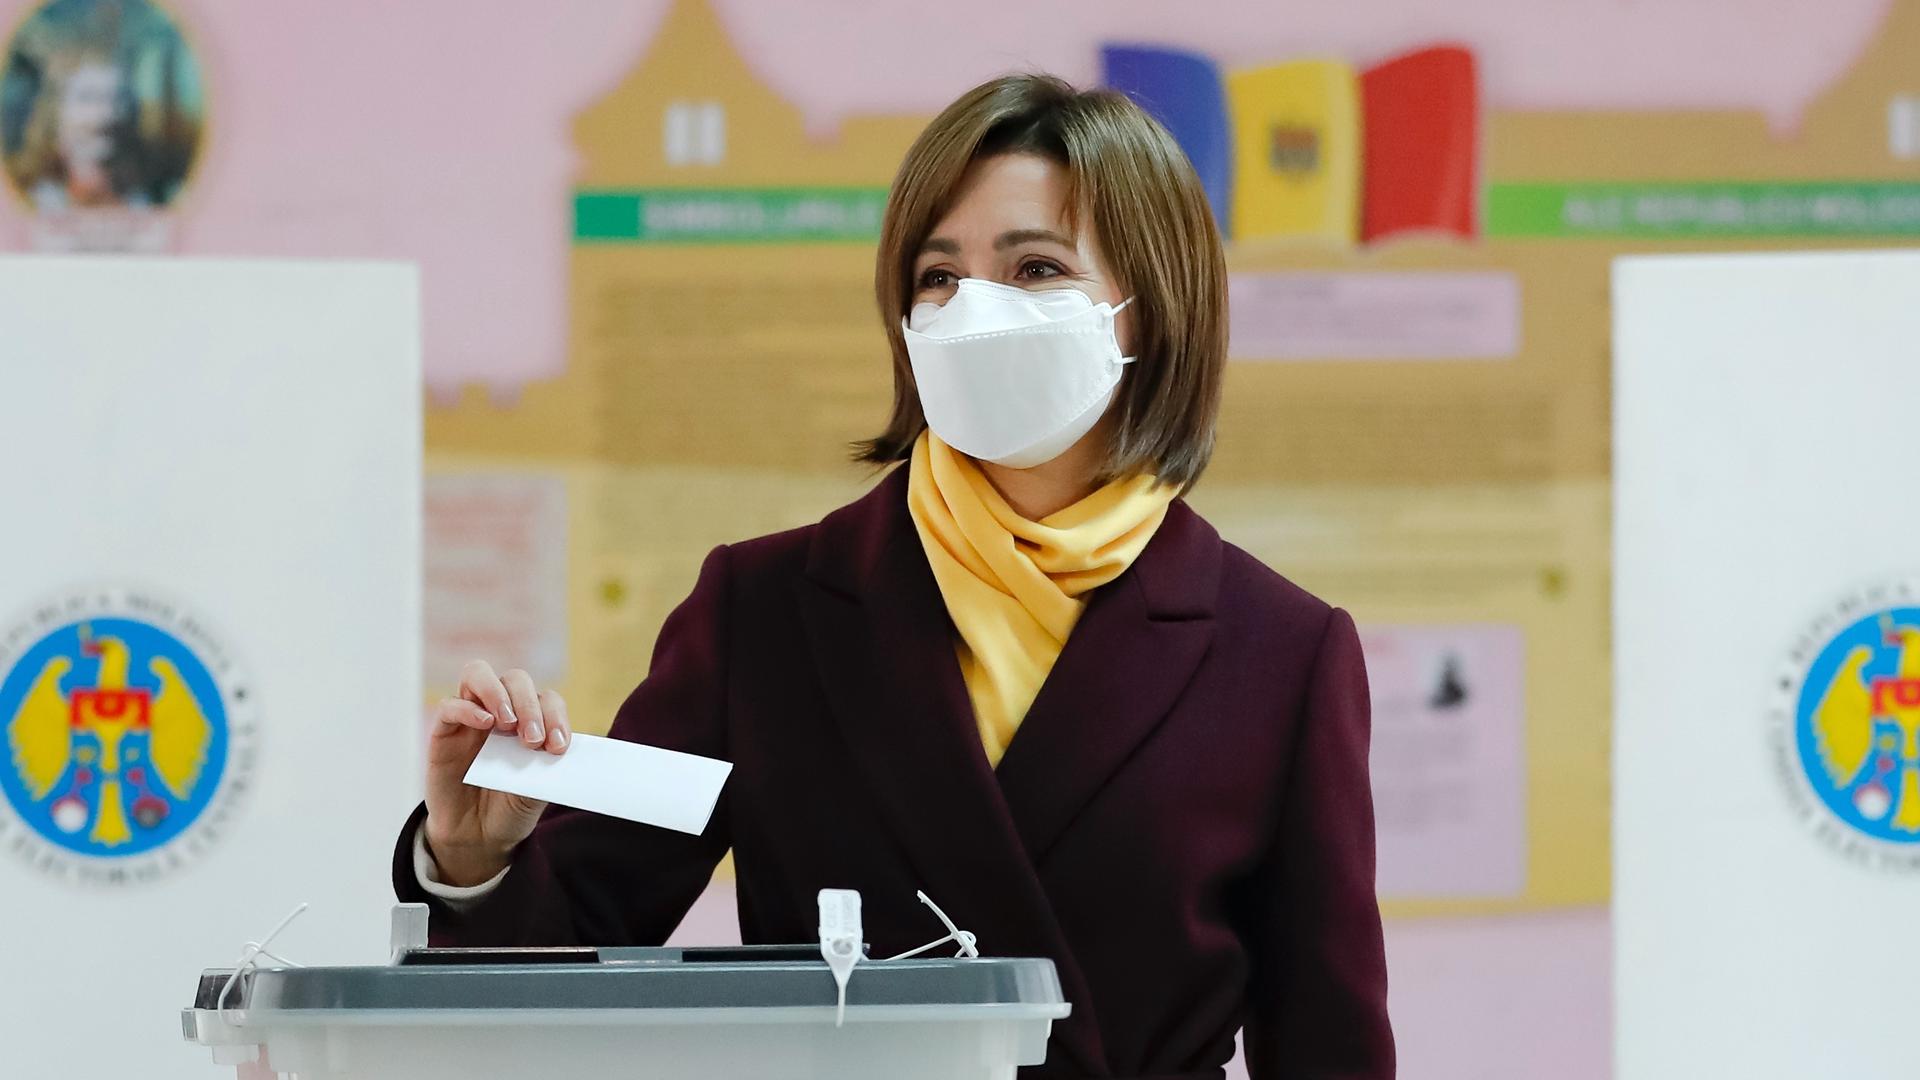 A woman wearing a suit with yellow shirt casts a ballot while wearing a mask